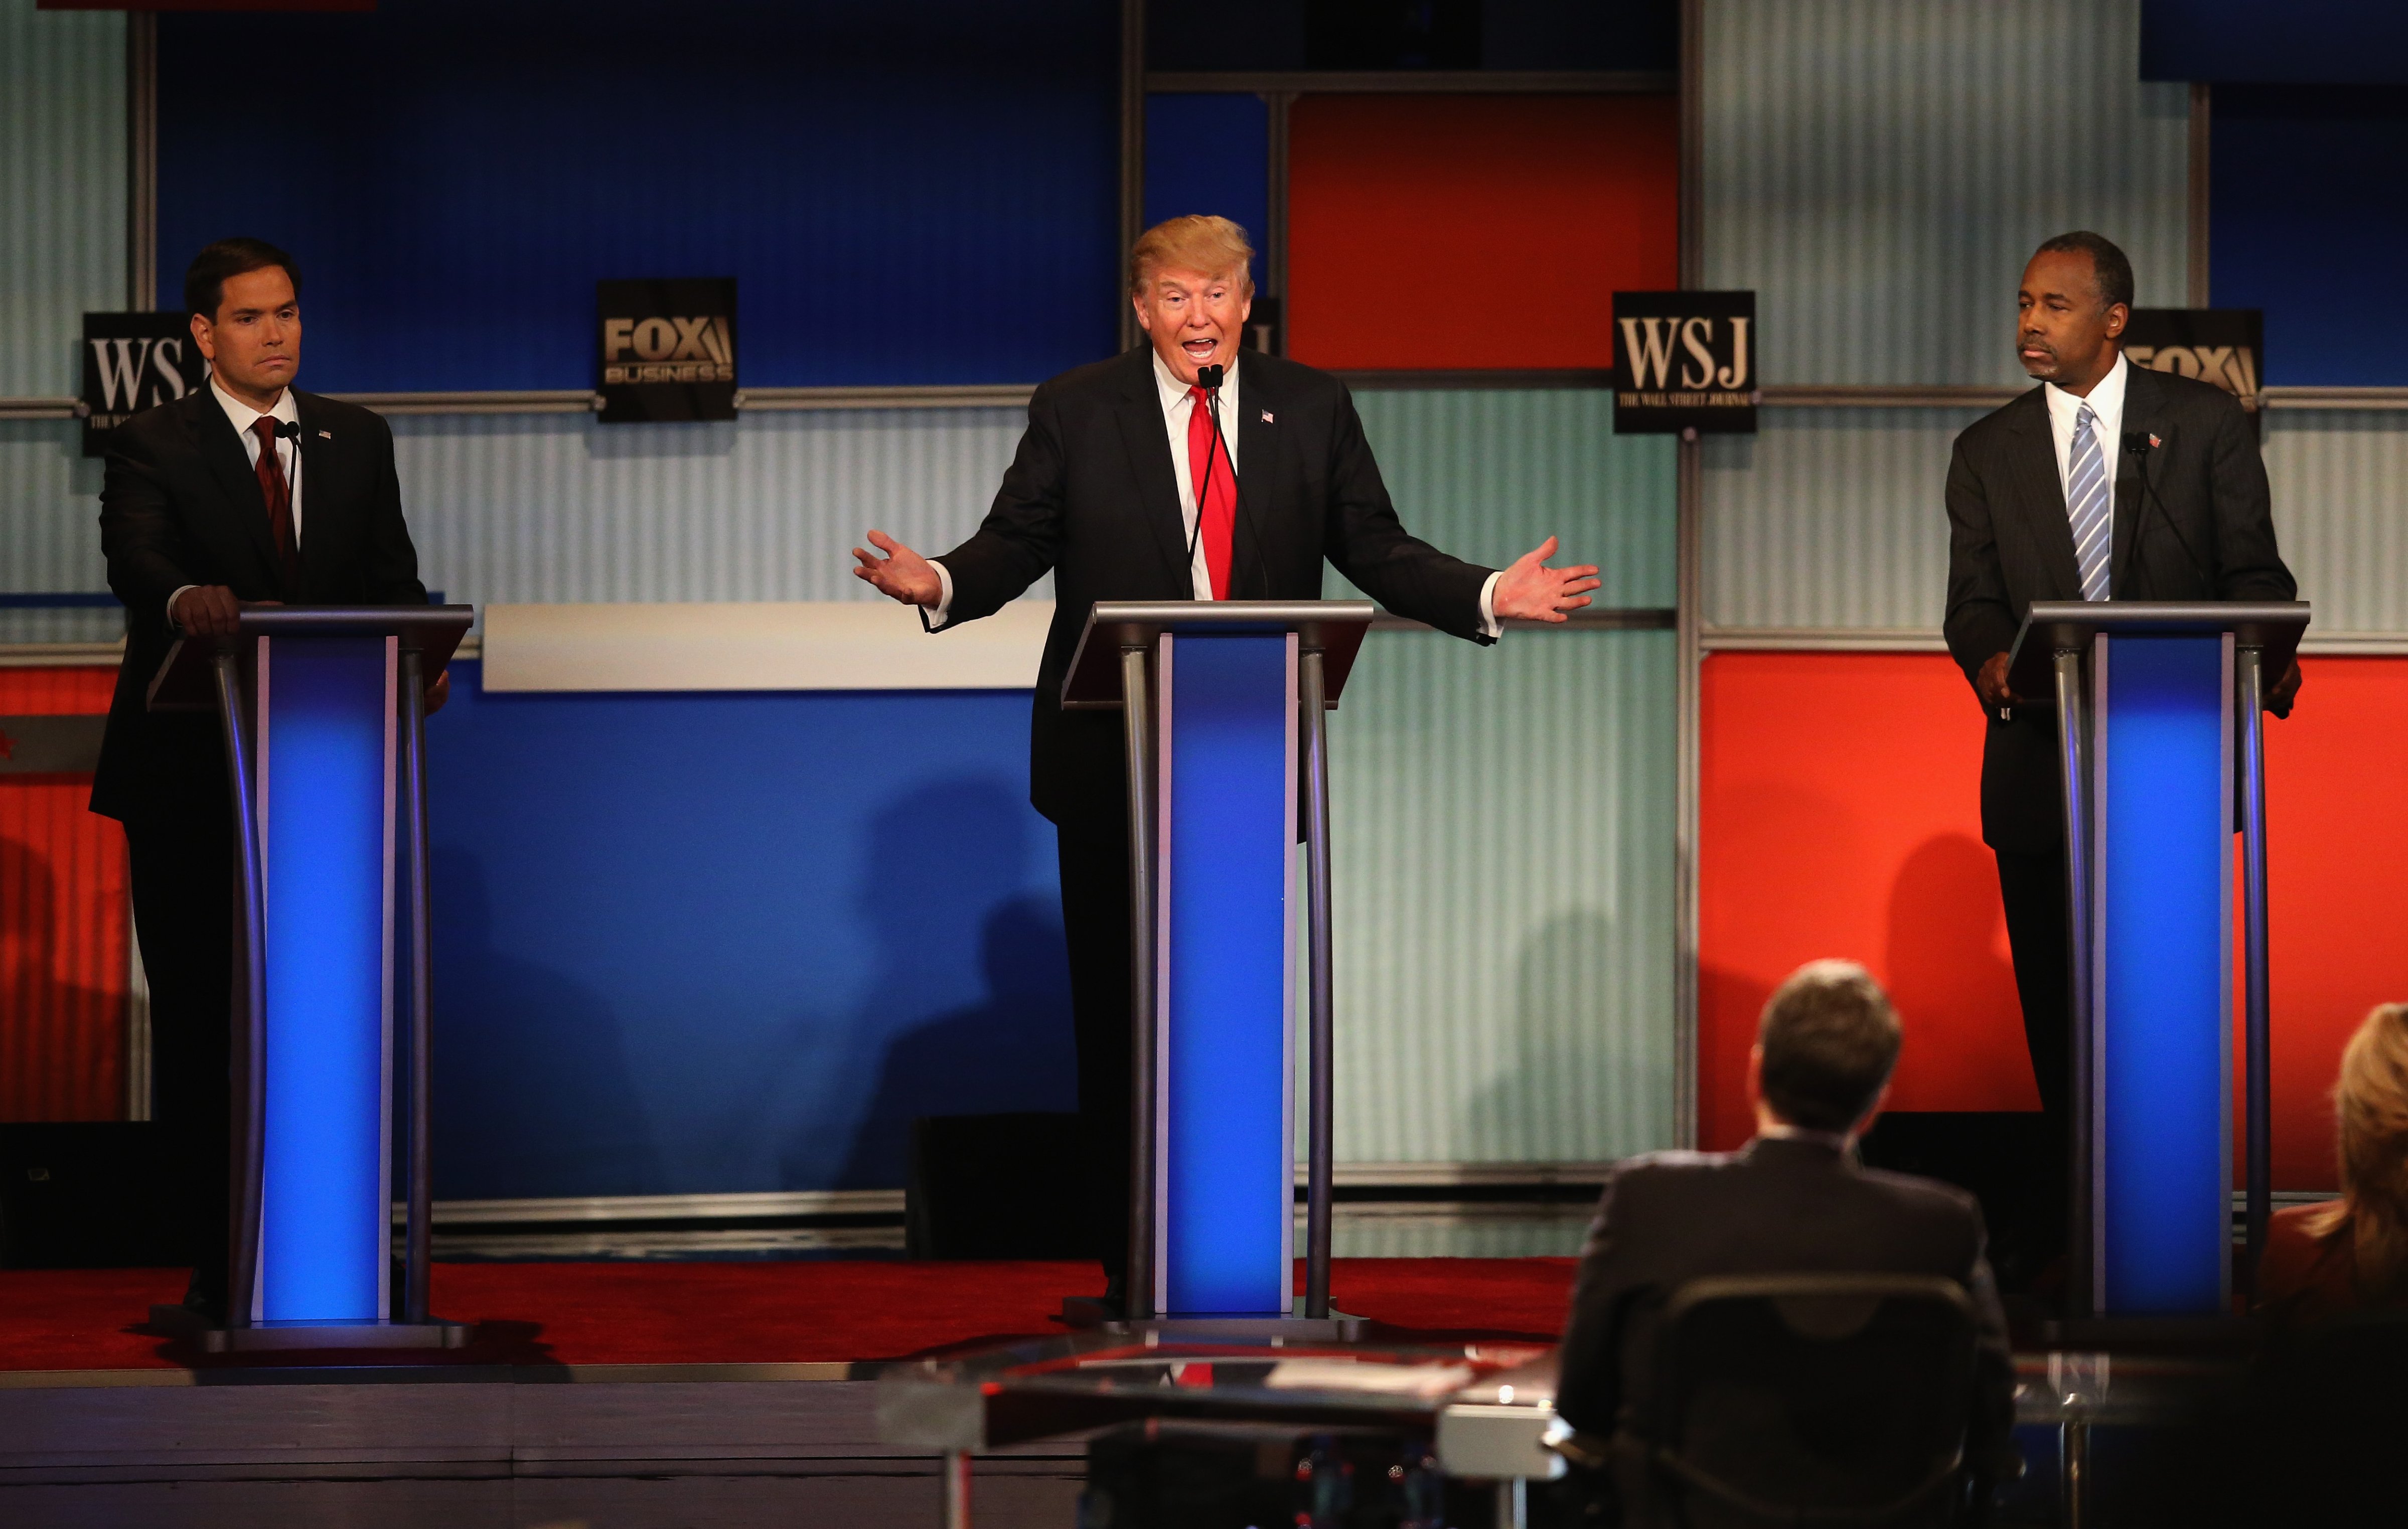 Presidential candidate Donald Trump (C) speaks while Sen. Marco Rubio (L) (R-FL), and Ben Carson look on during the Republican Presidential Debate sponsored by Fox Business and the Wall Street Journal in Milwaukee, Wisc., on Nov. 10, 2015. (Scott Olson—Getty Images)